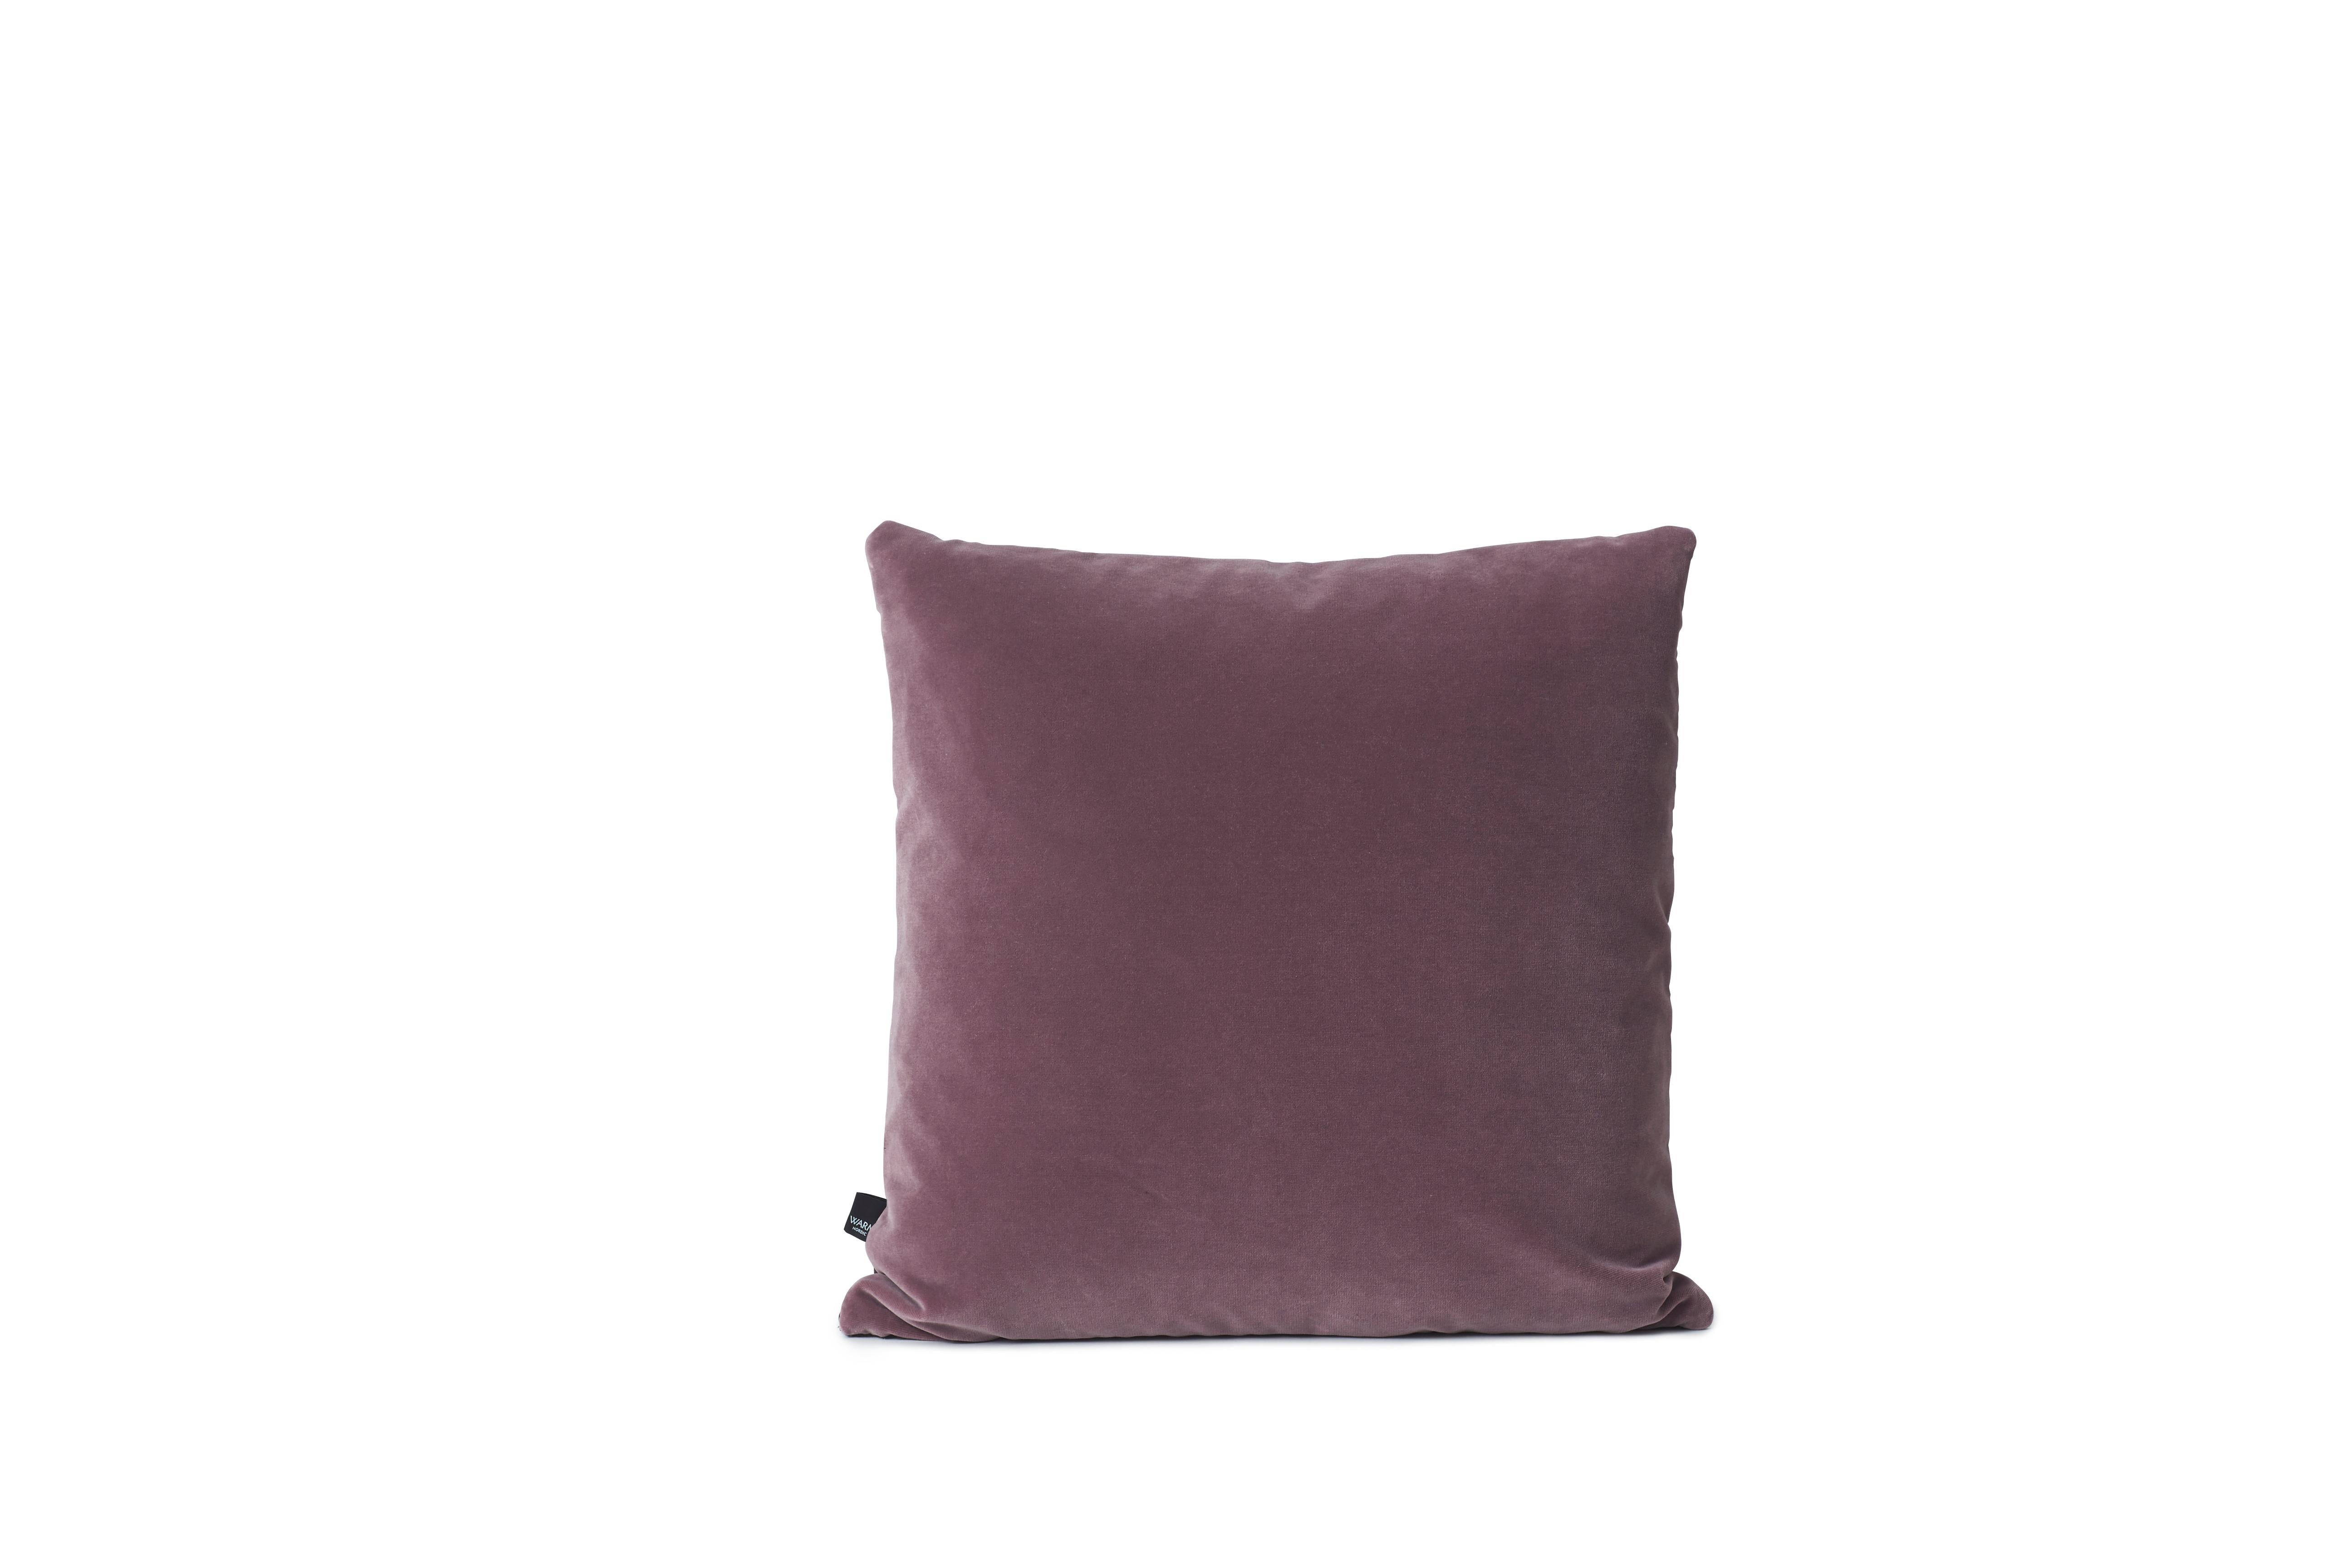 For Sale: Black Moodify Square Cushion, by Warm Nordic 2